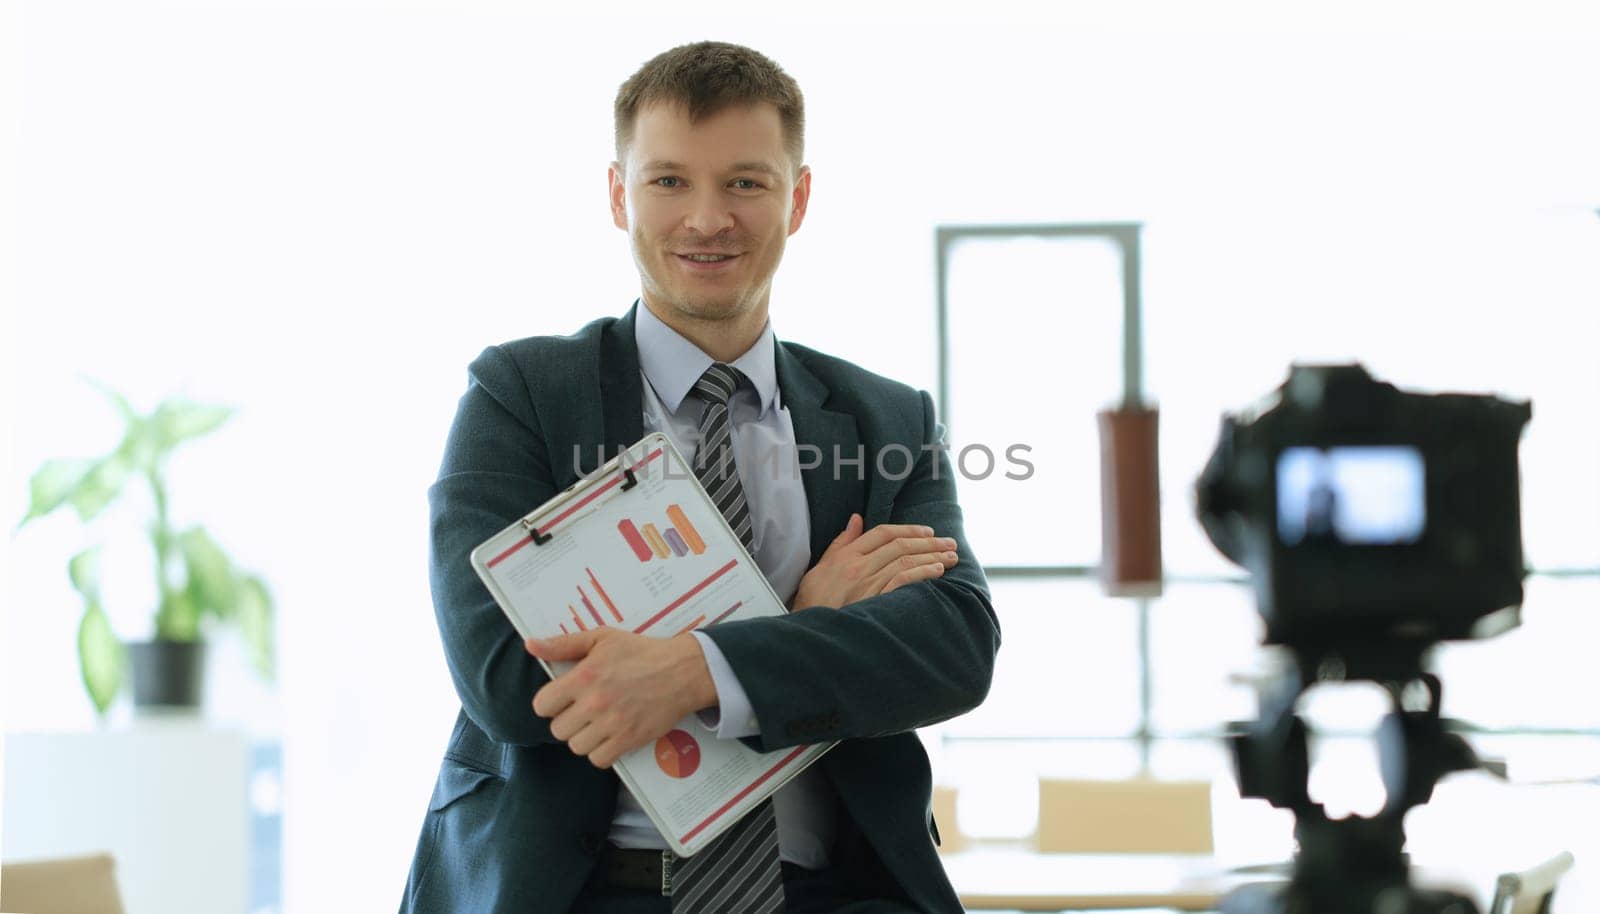 Business coach crossed arms with documents with graphs in front of camera in office. Business development school online concept